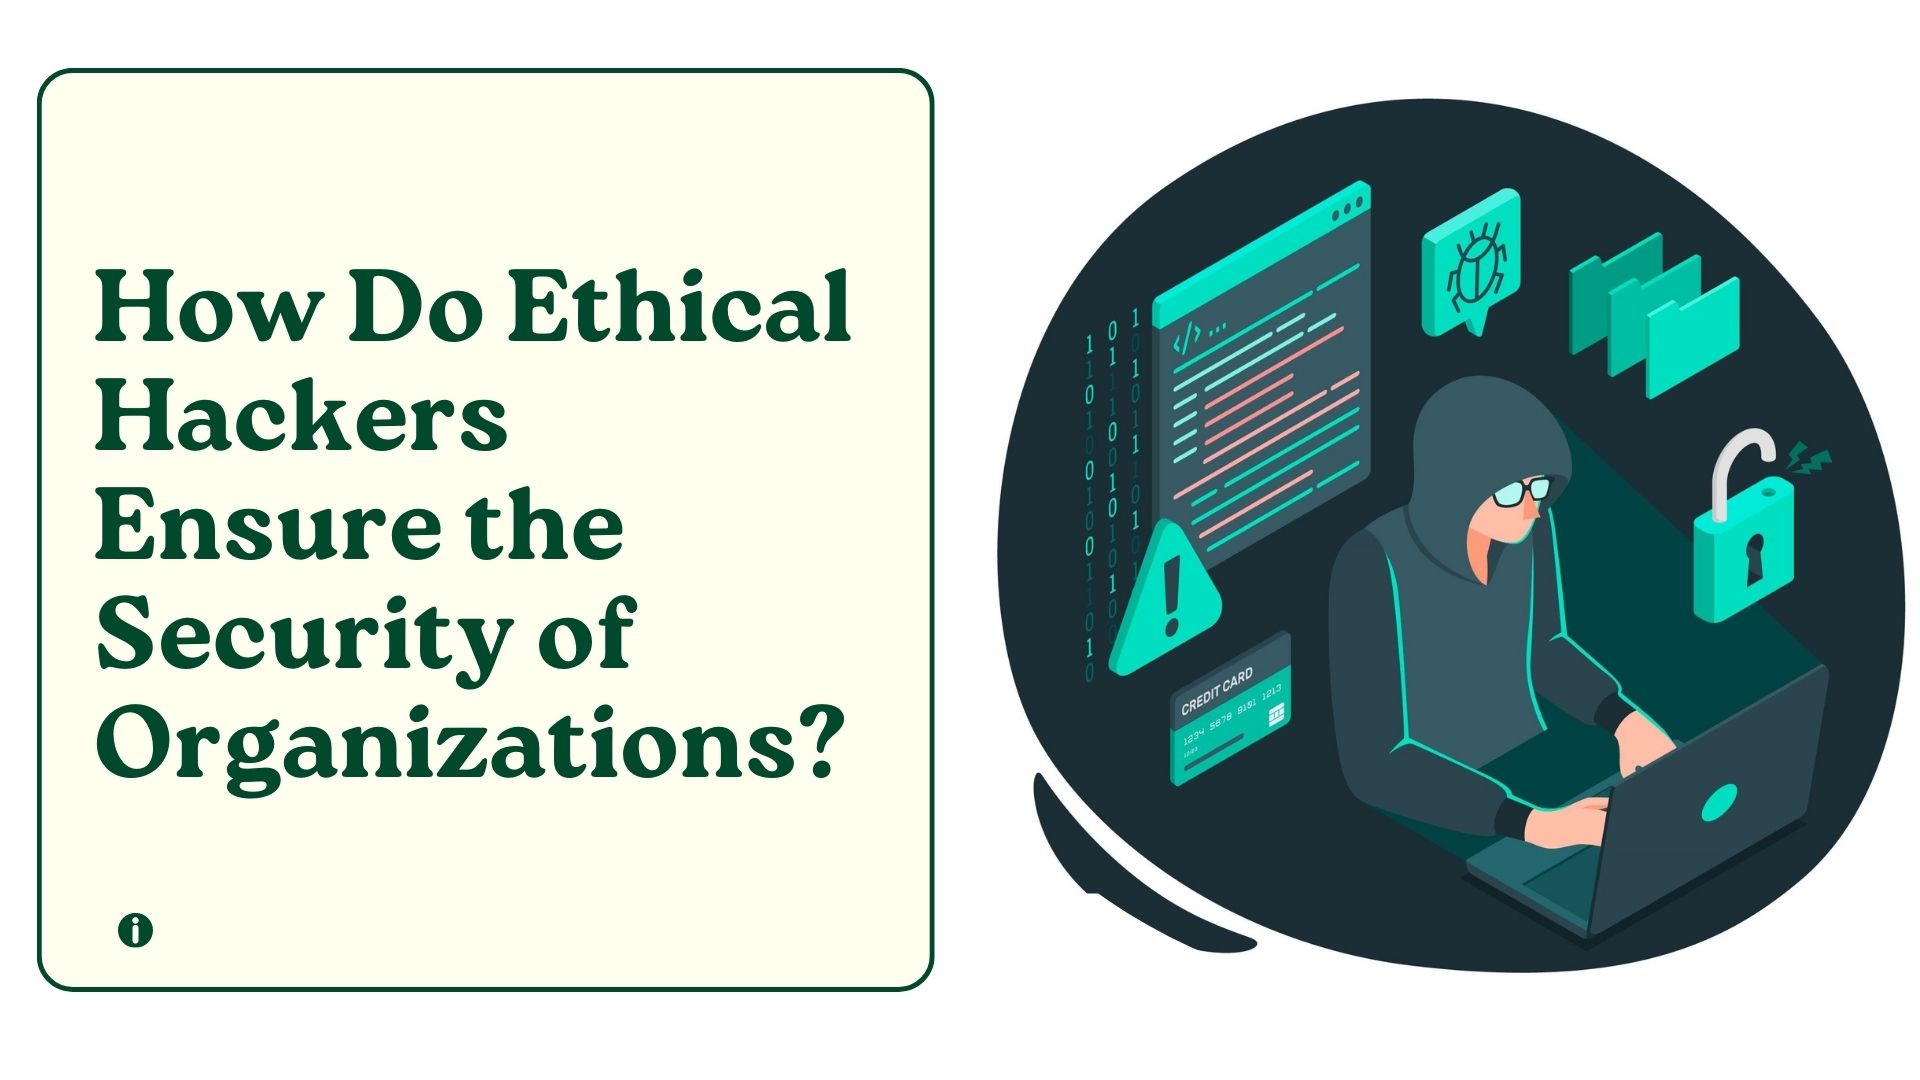 How Do Ethical Hackers Ensure the Security of Organizations?